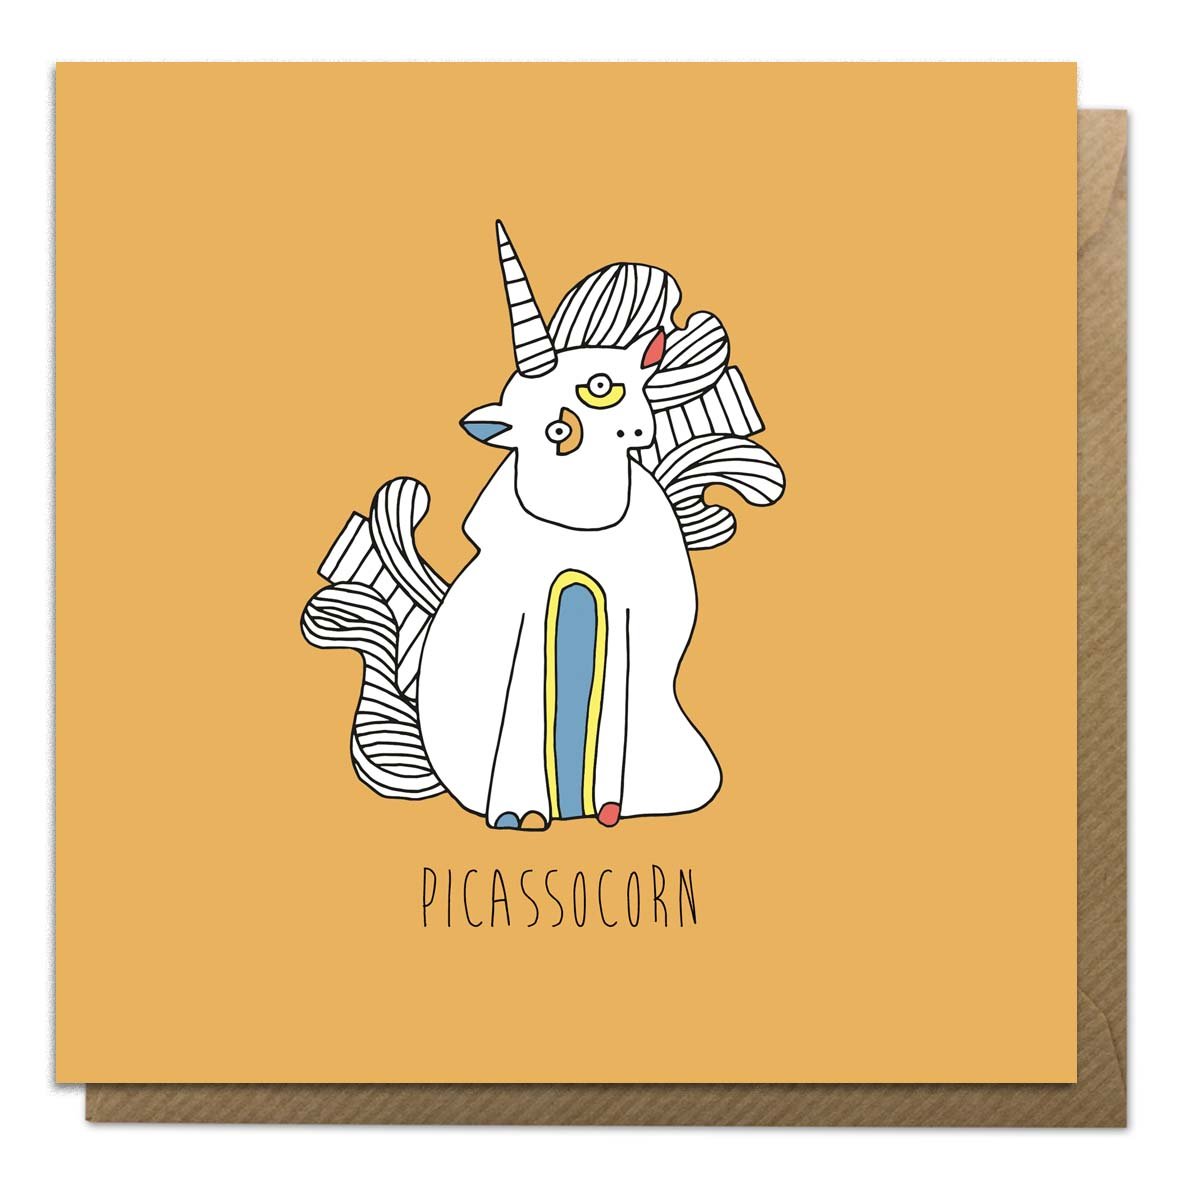 Orange greeting card with an illustration of Picasso unicorn